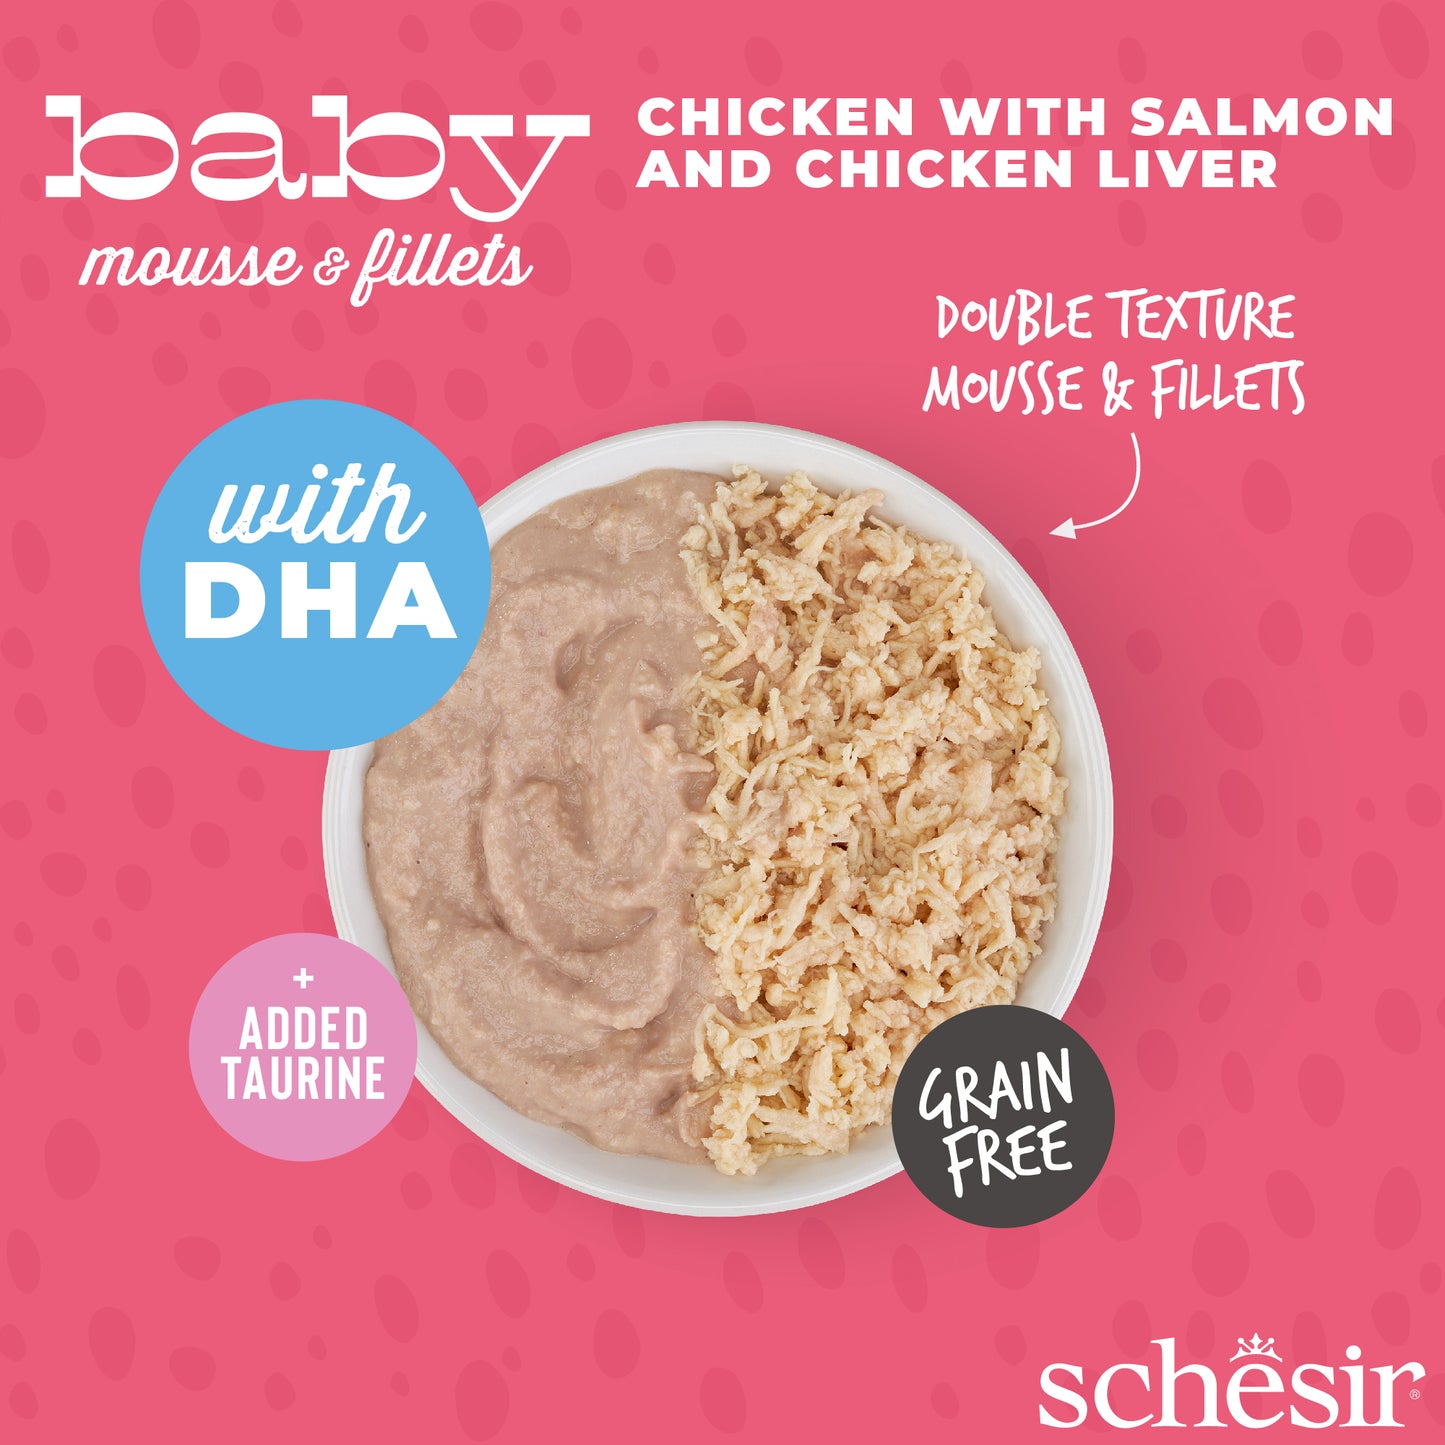 [5% OFF NNC Members] Schesir Baby Mousse & Fillets - Chicken with Salmon & Chicken Liver, 3 x 55g